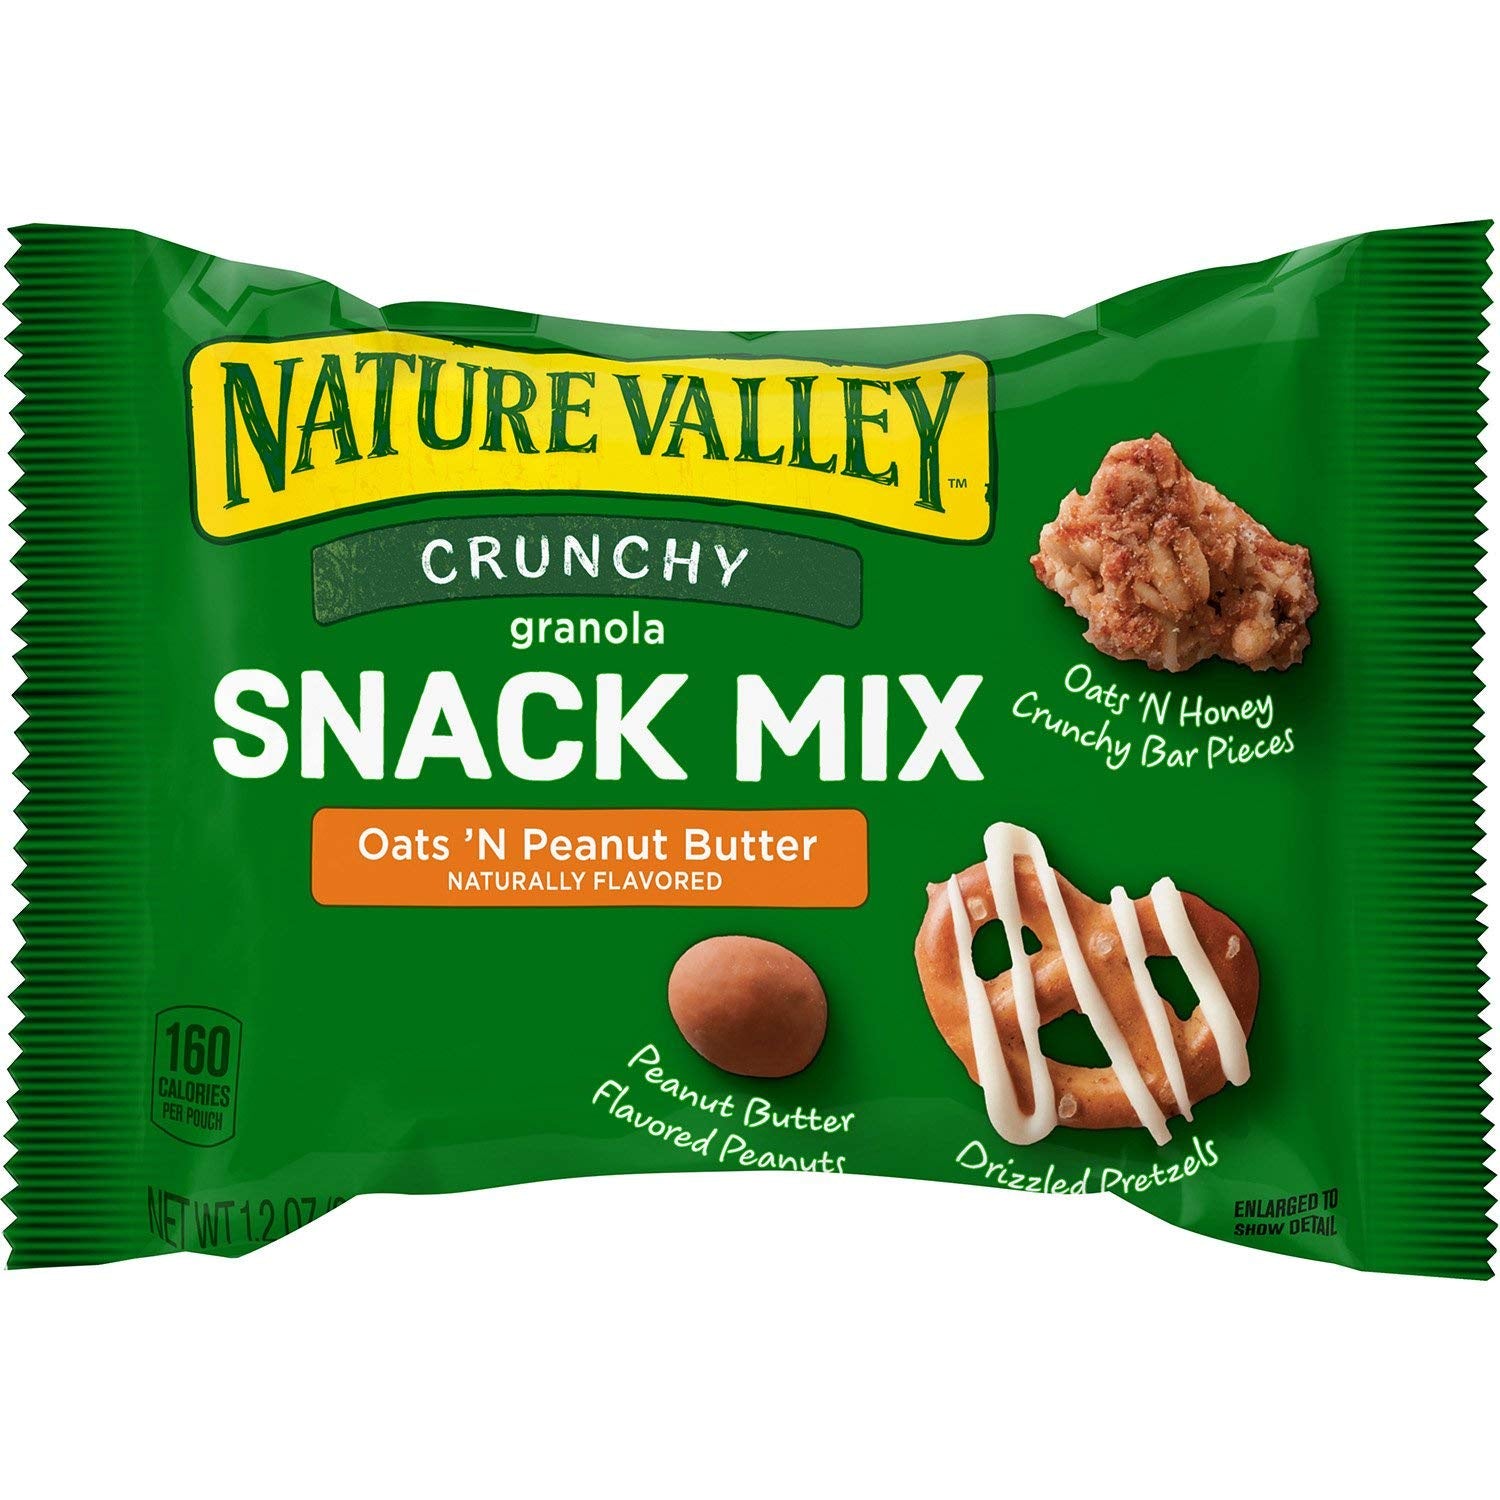 Nature Valley Crunchy Granola Snack Mix Snack Pack 6 Packs